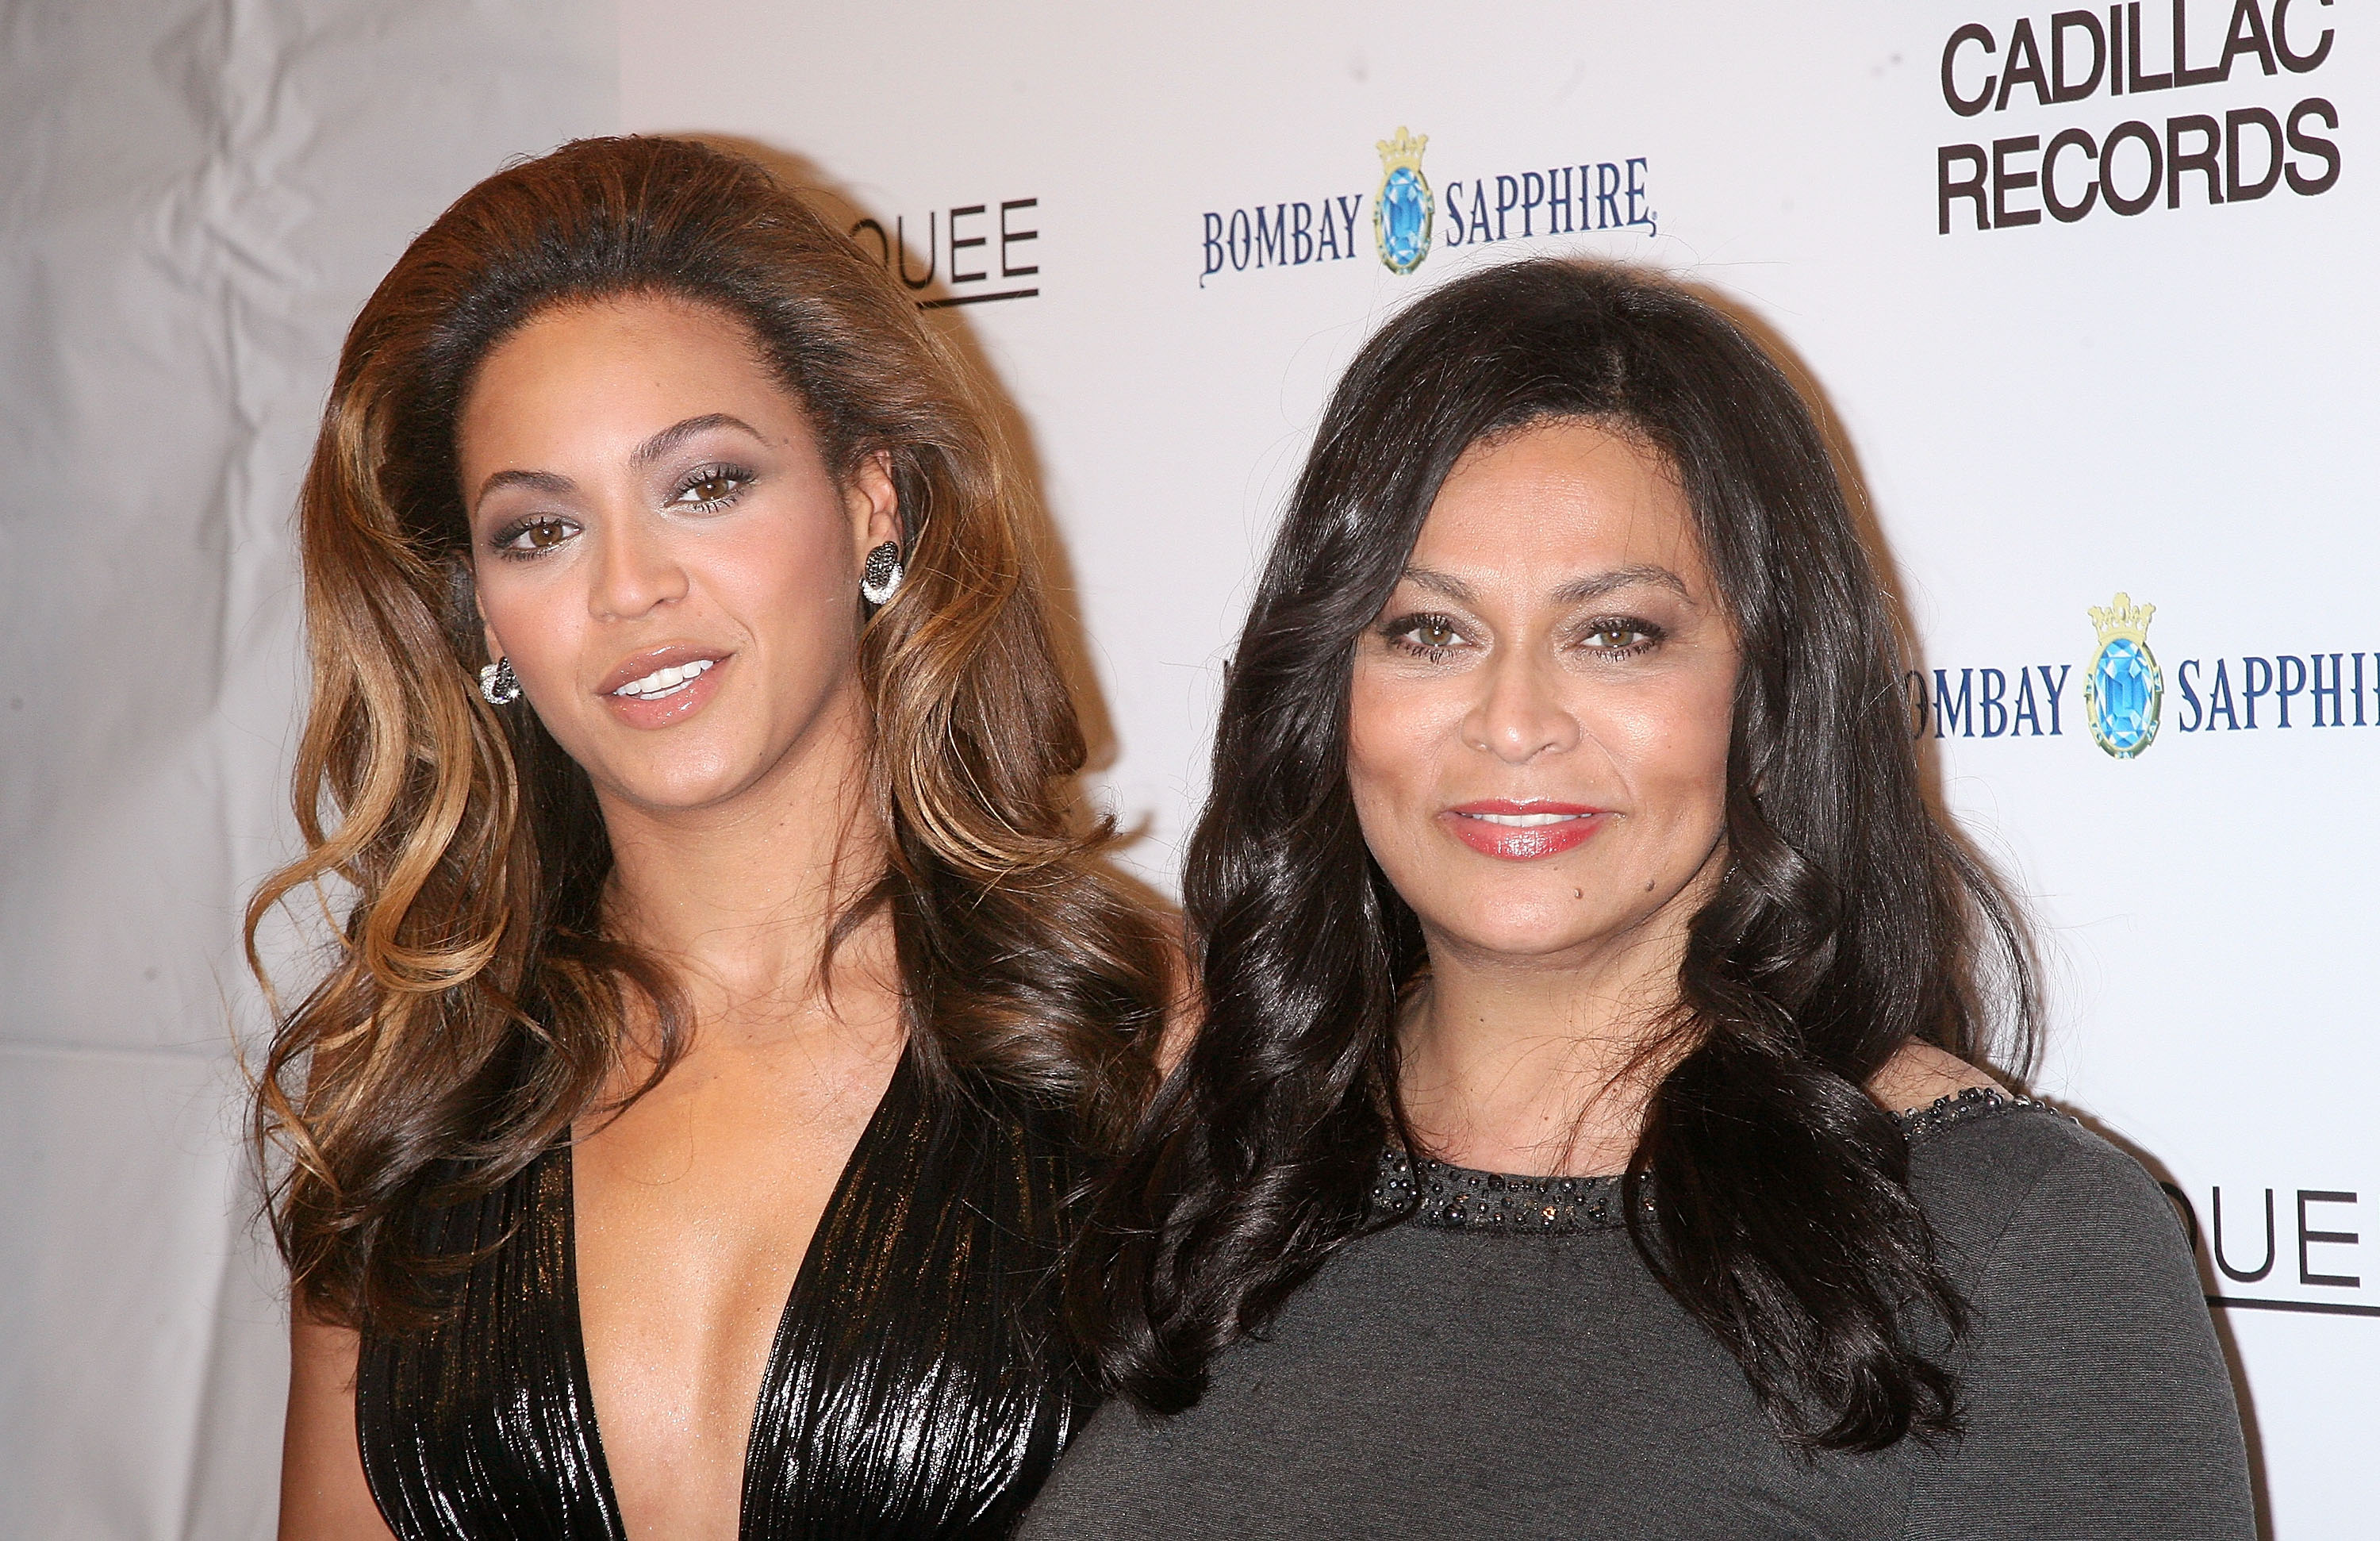 Beyoncé and her mother Tina Knowles attend the premiere of "Cadillac Records" at the AMC Loews 19 on December 1, 2008, in New York City. | Source: Getty Images